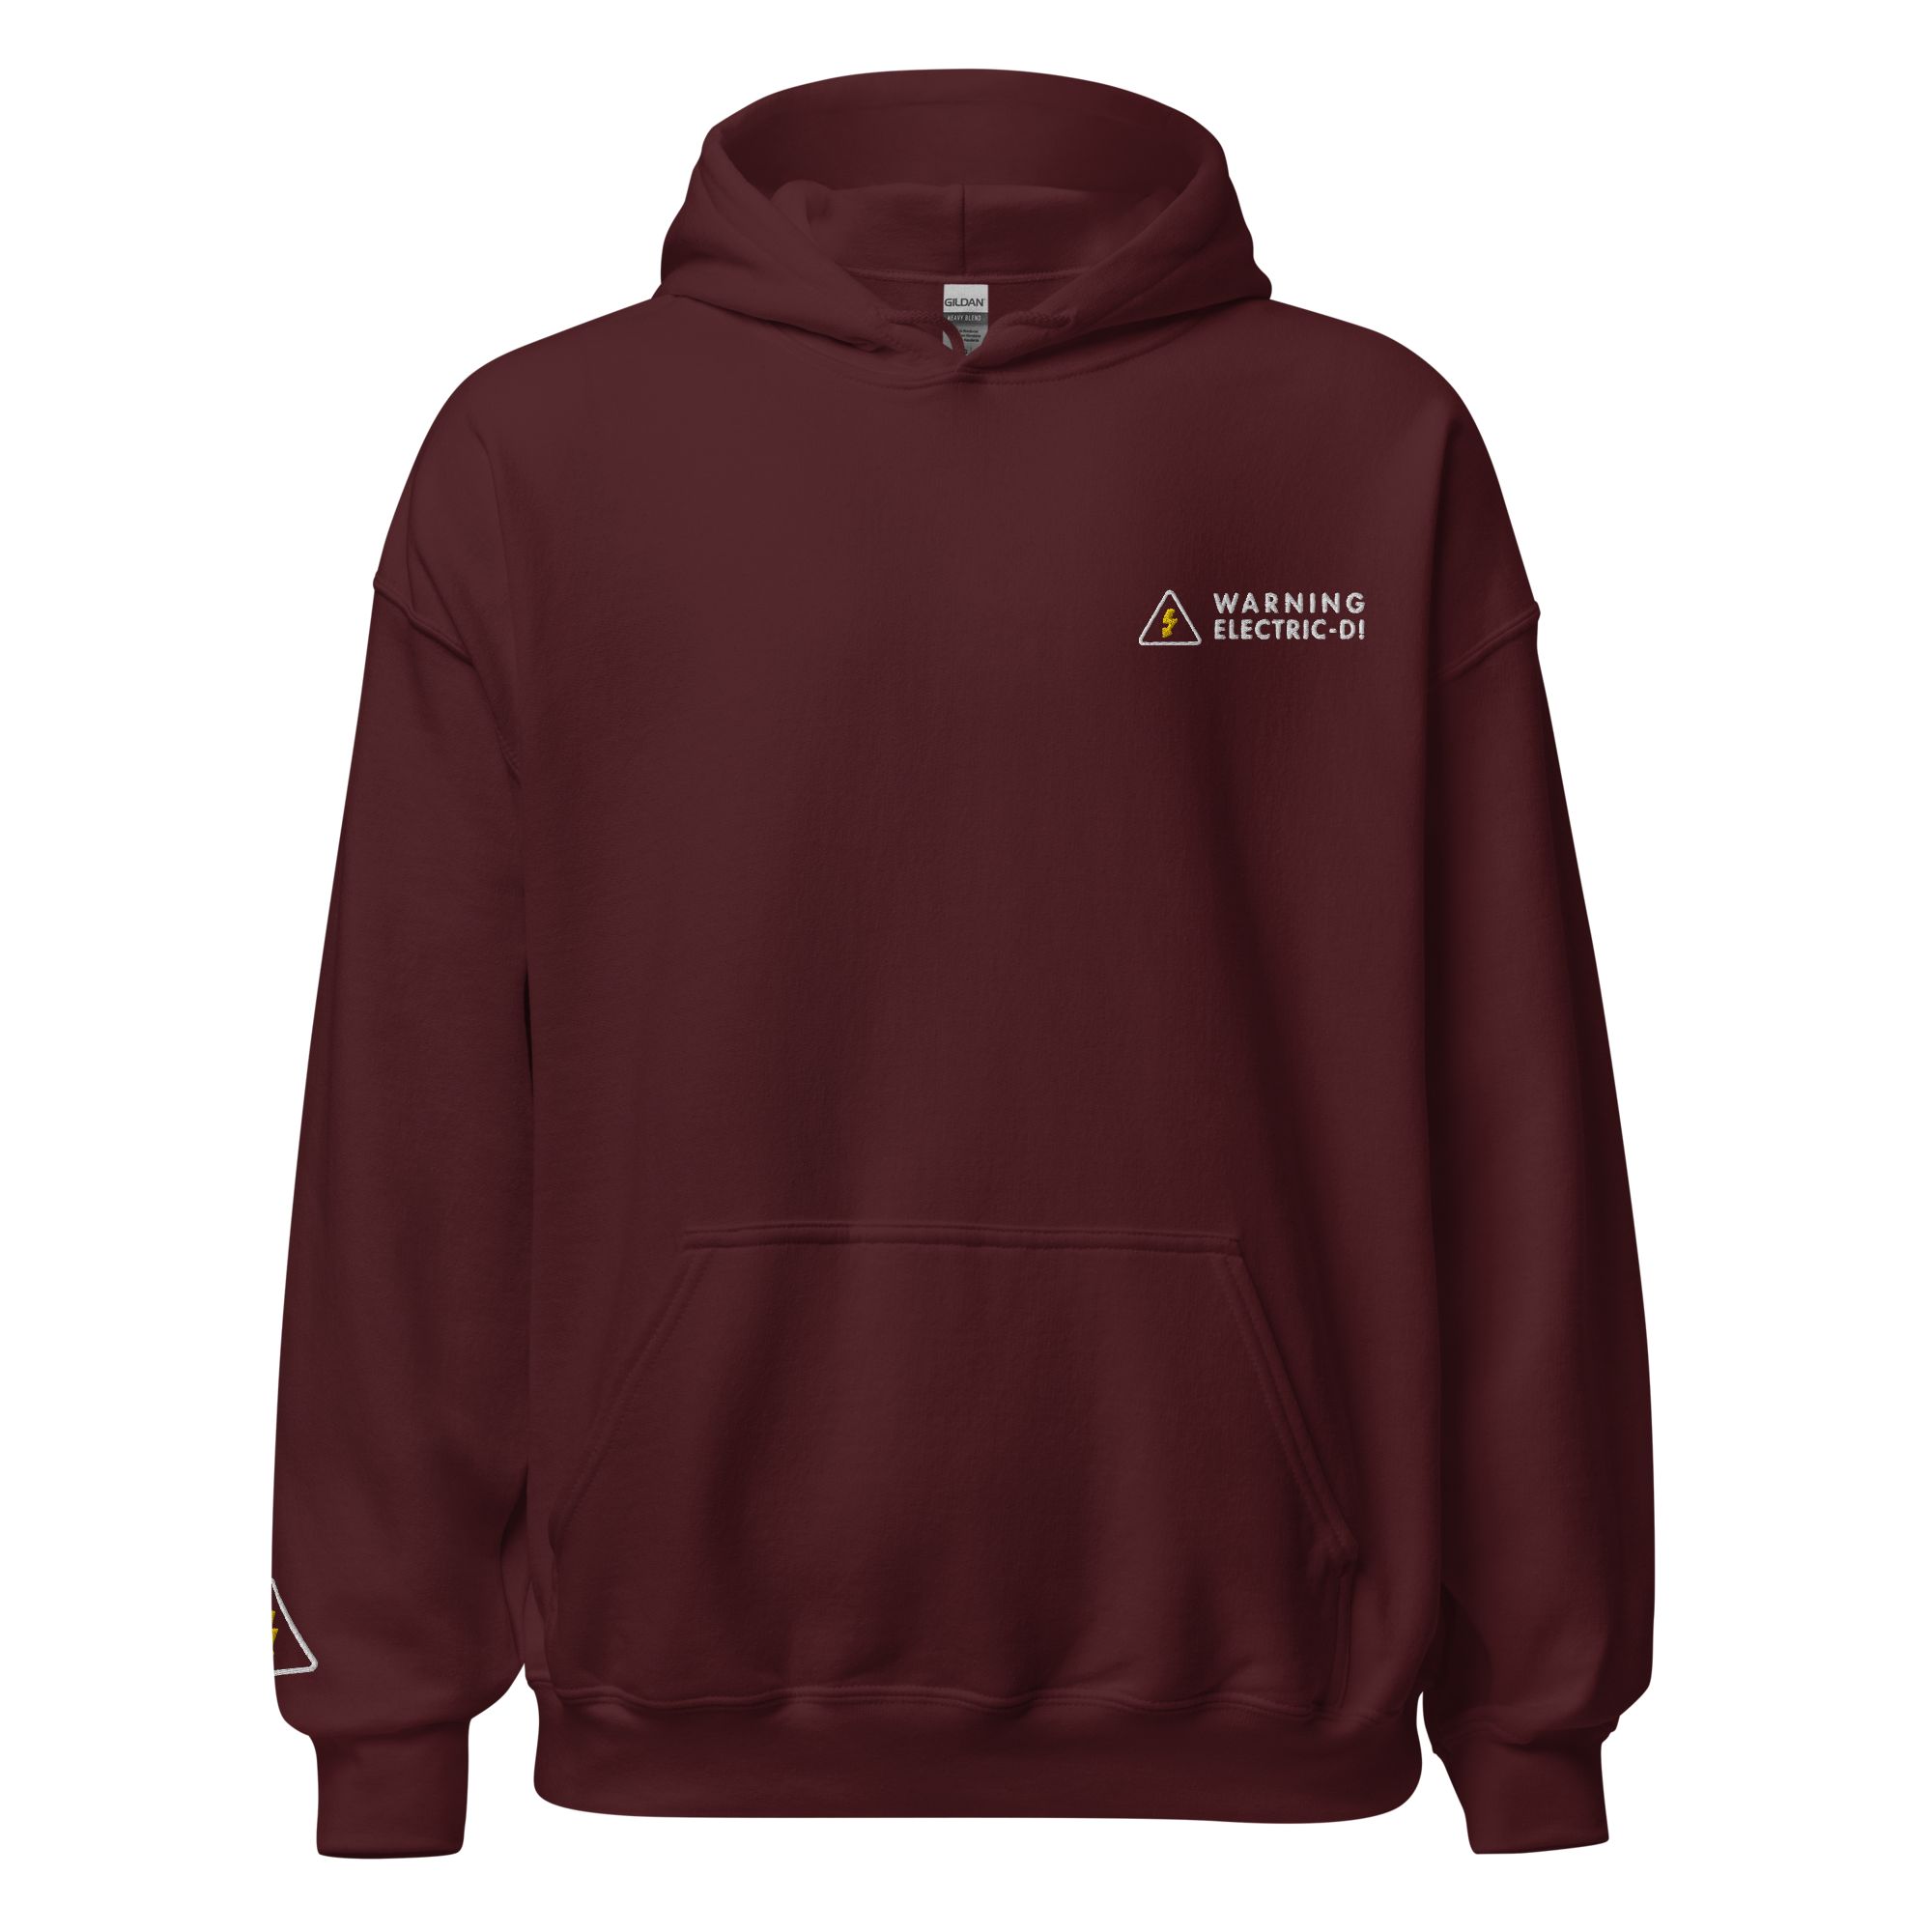 Electric-D! Pullover Hoodie